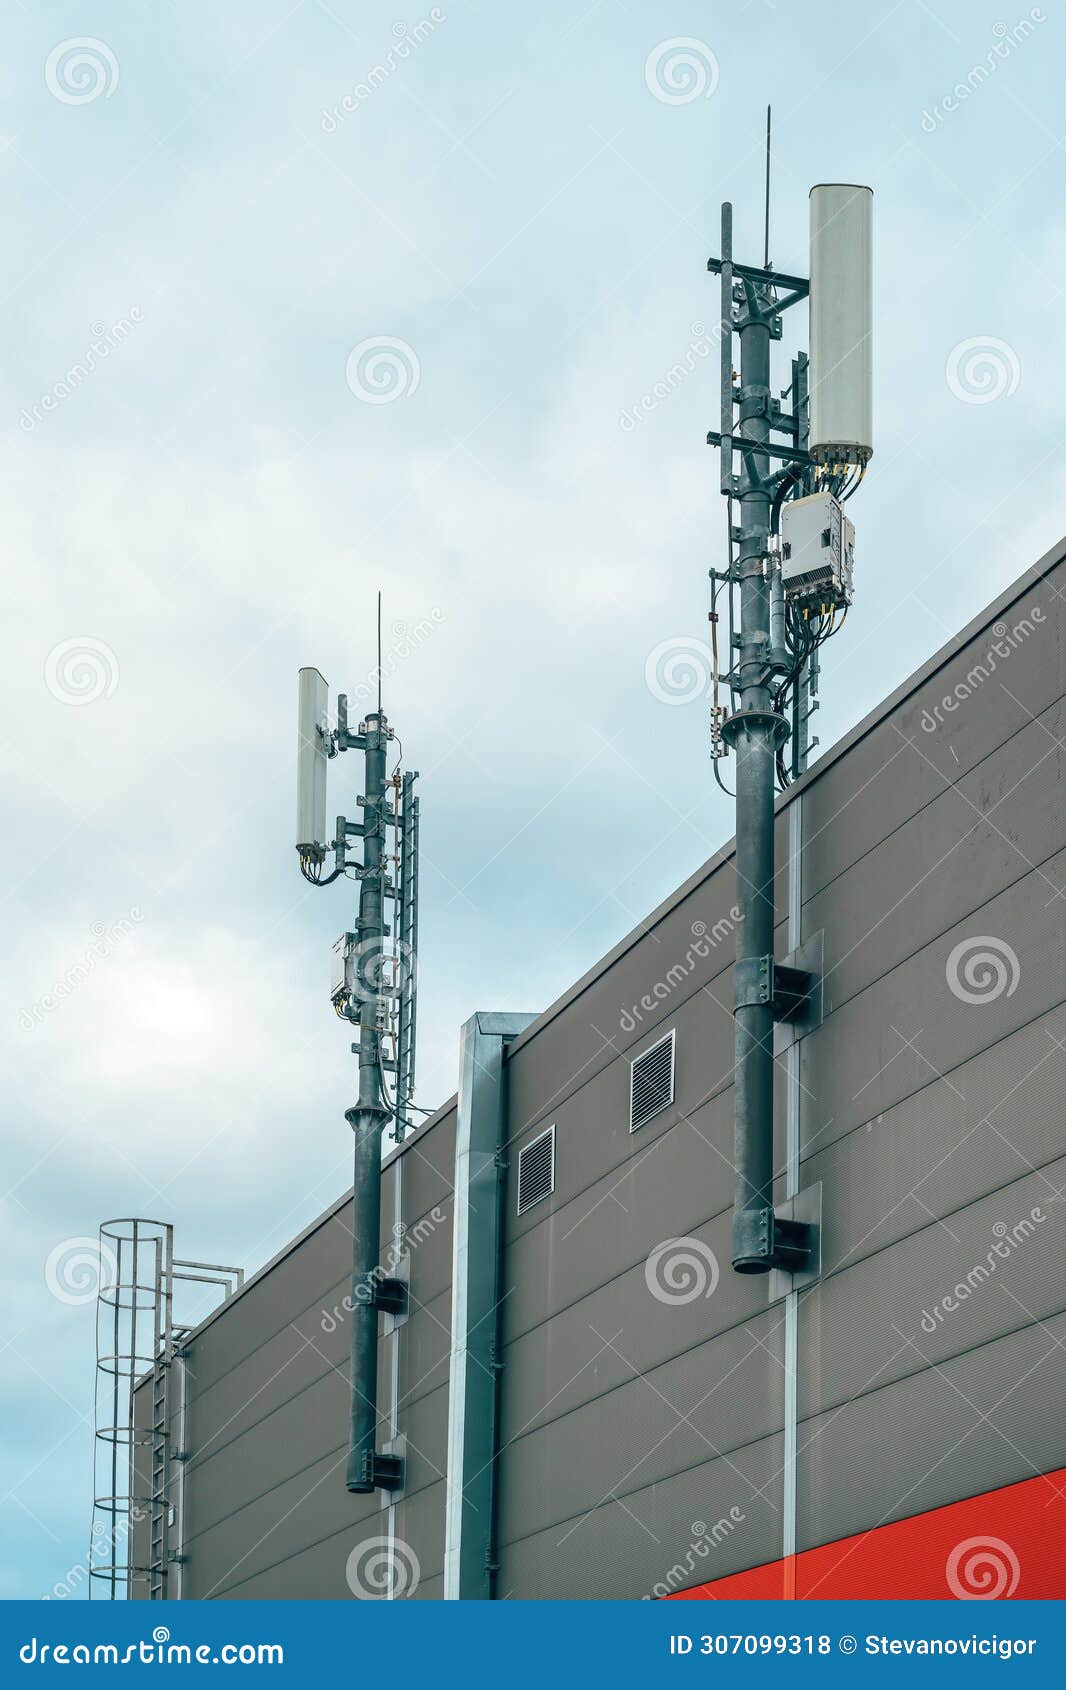 mobile telephony base station and signal repeater antenna on industrial building